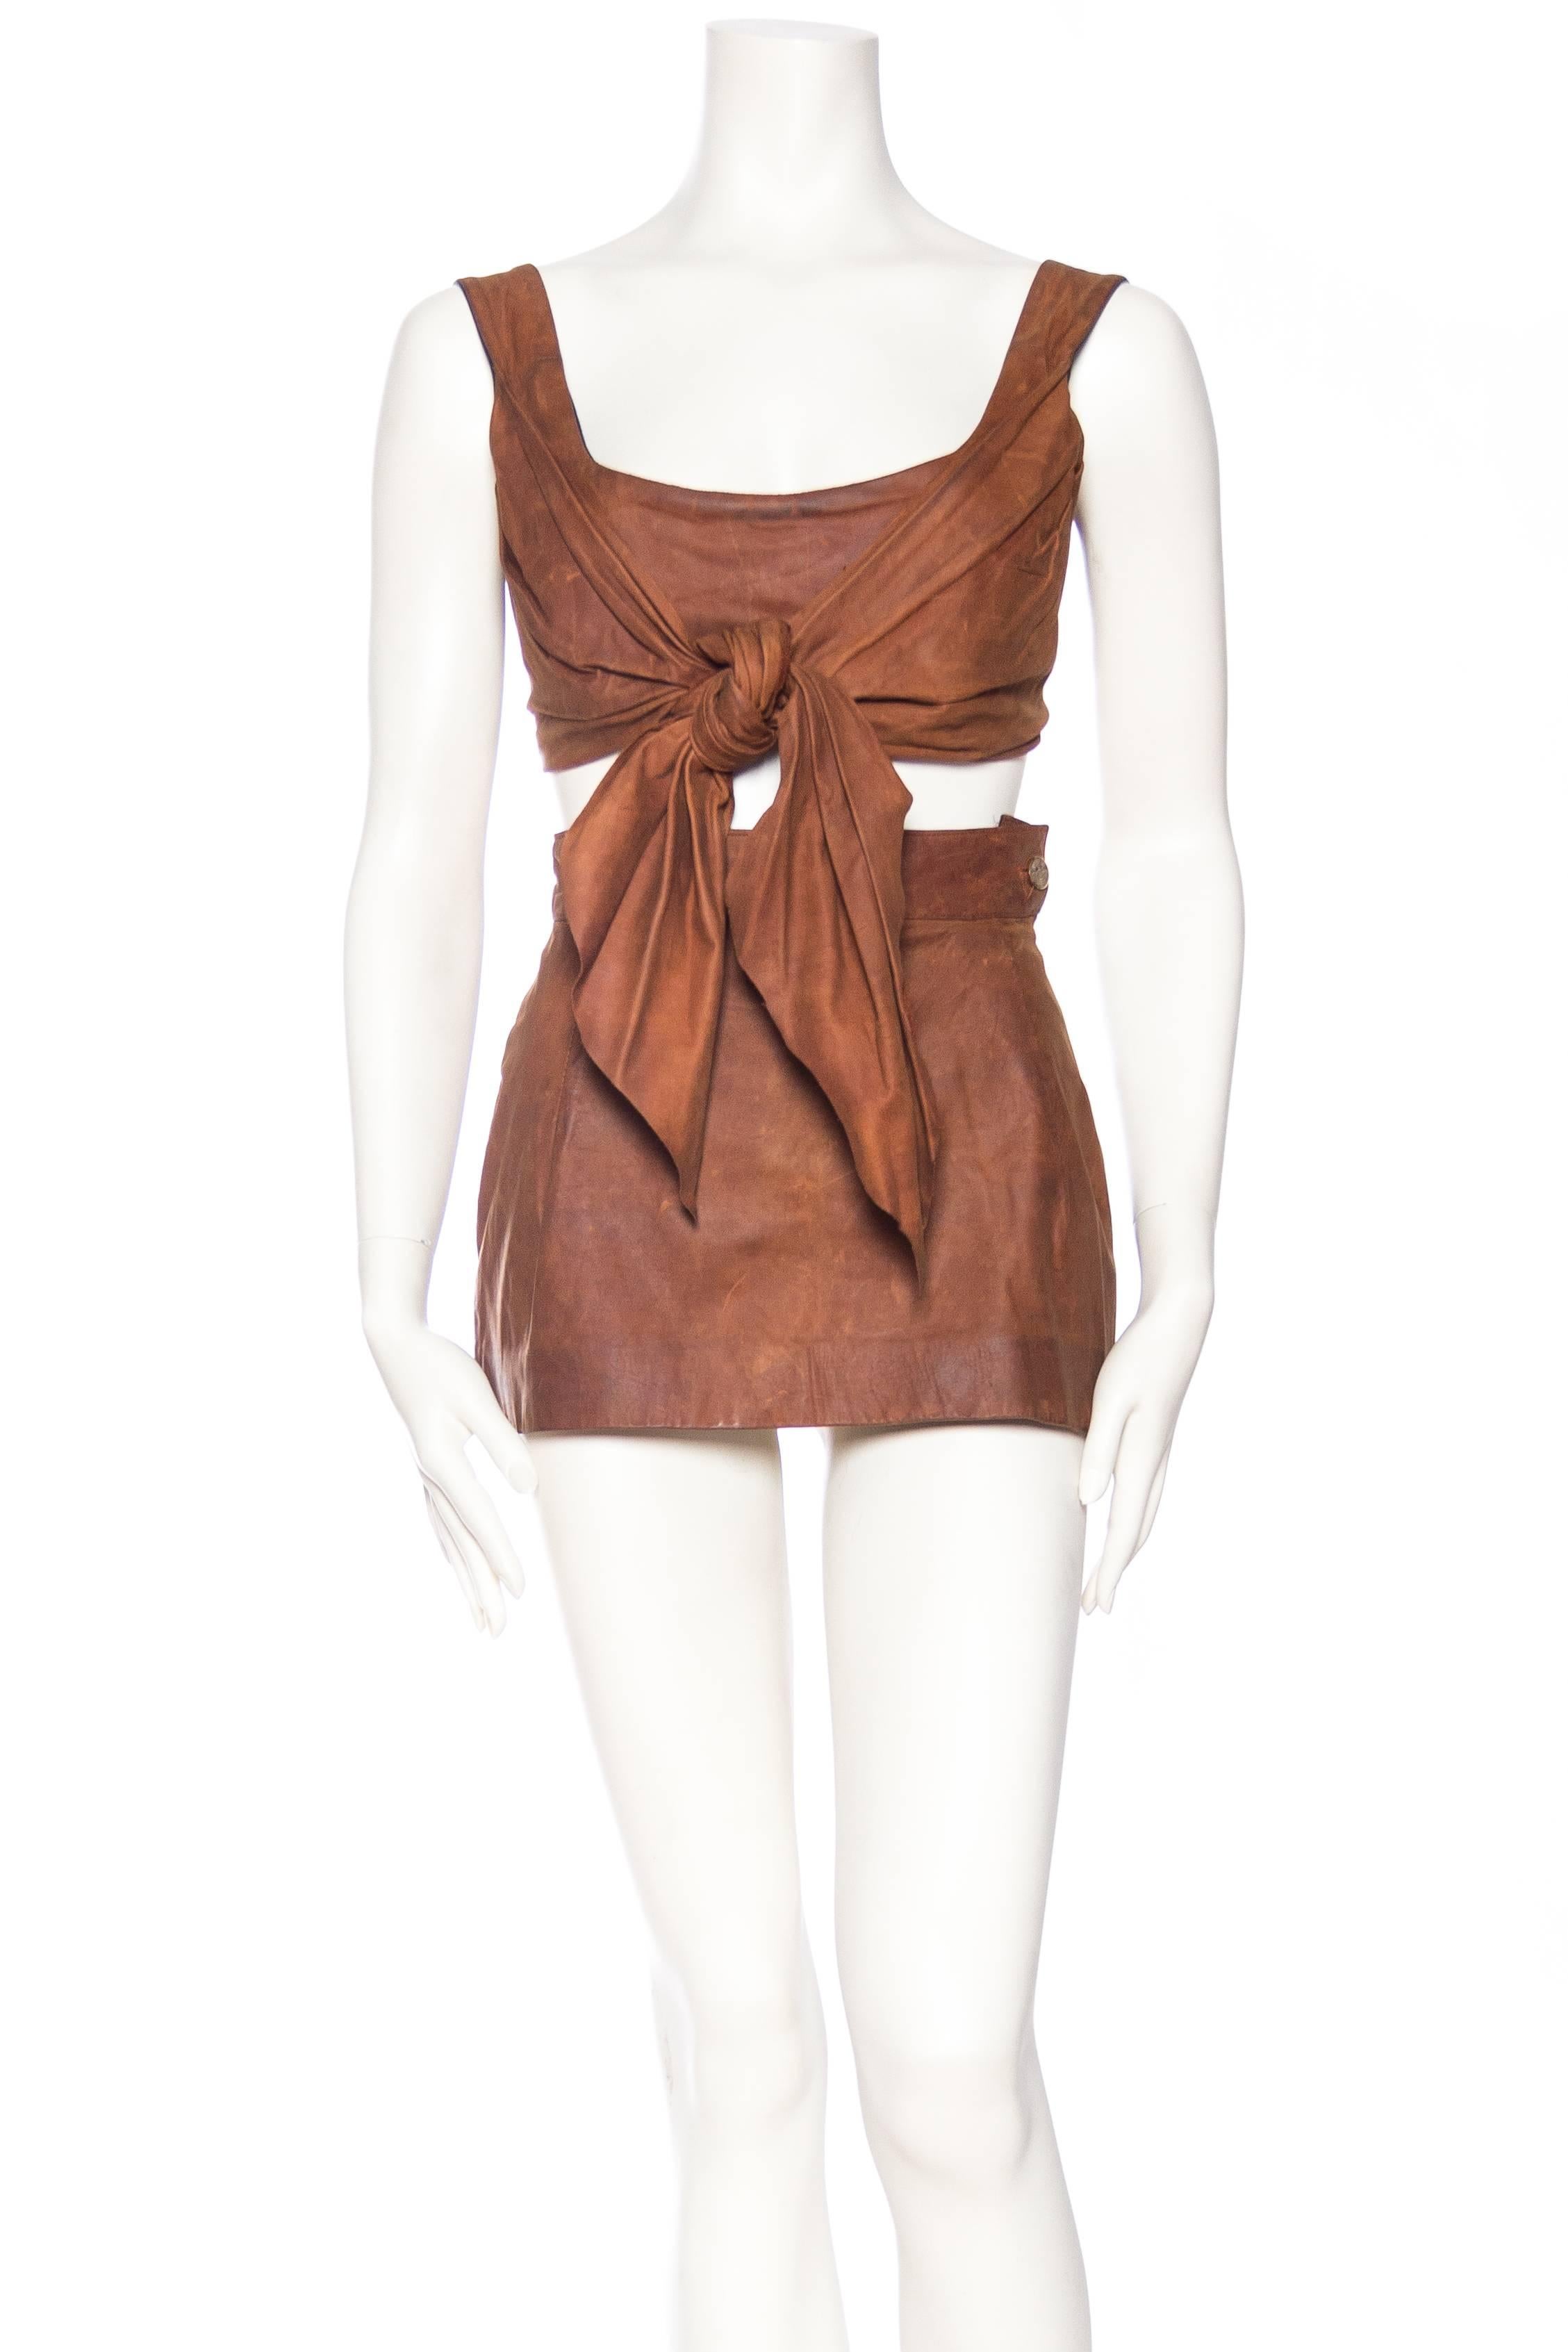 1990s Vivienne Westwood Leather Corset Top and Skirt 